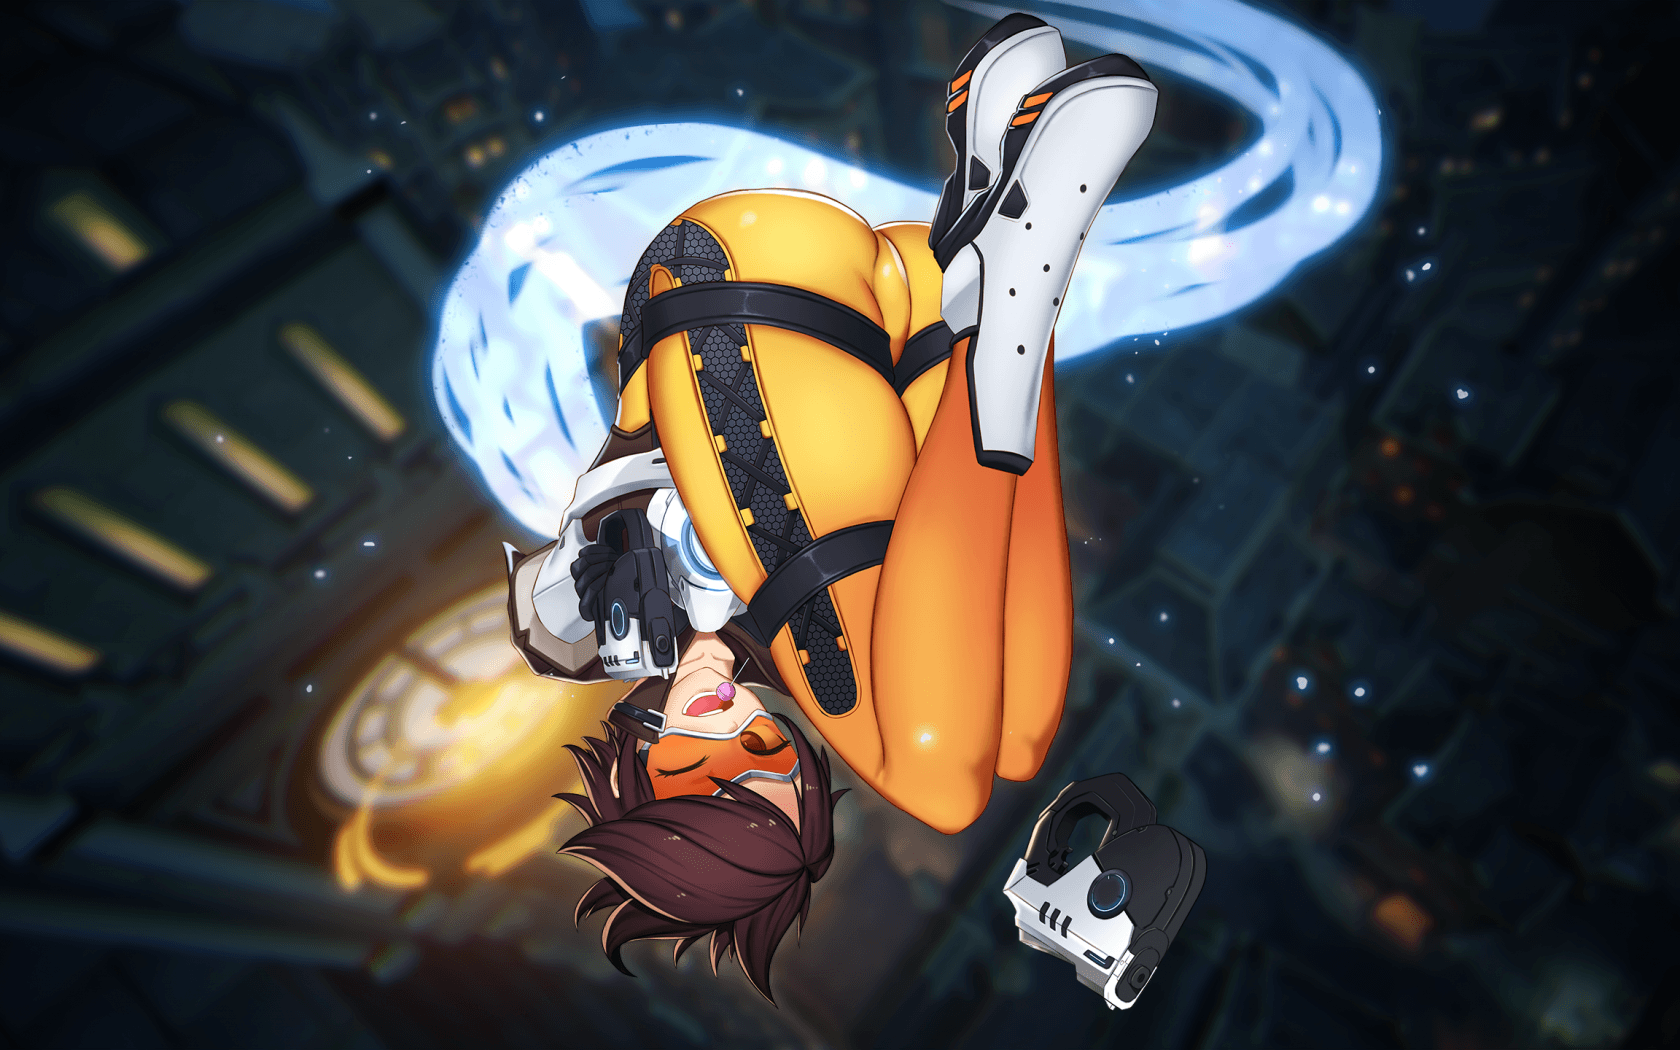 Download 1680x1050 Overwatch, Tracer, Anime Style Wallpaper